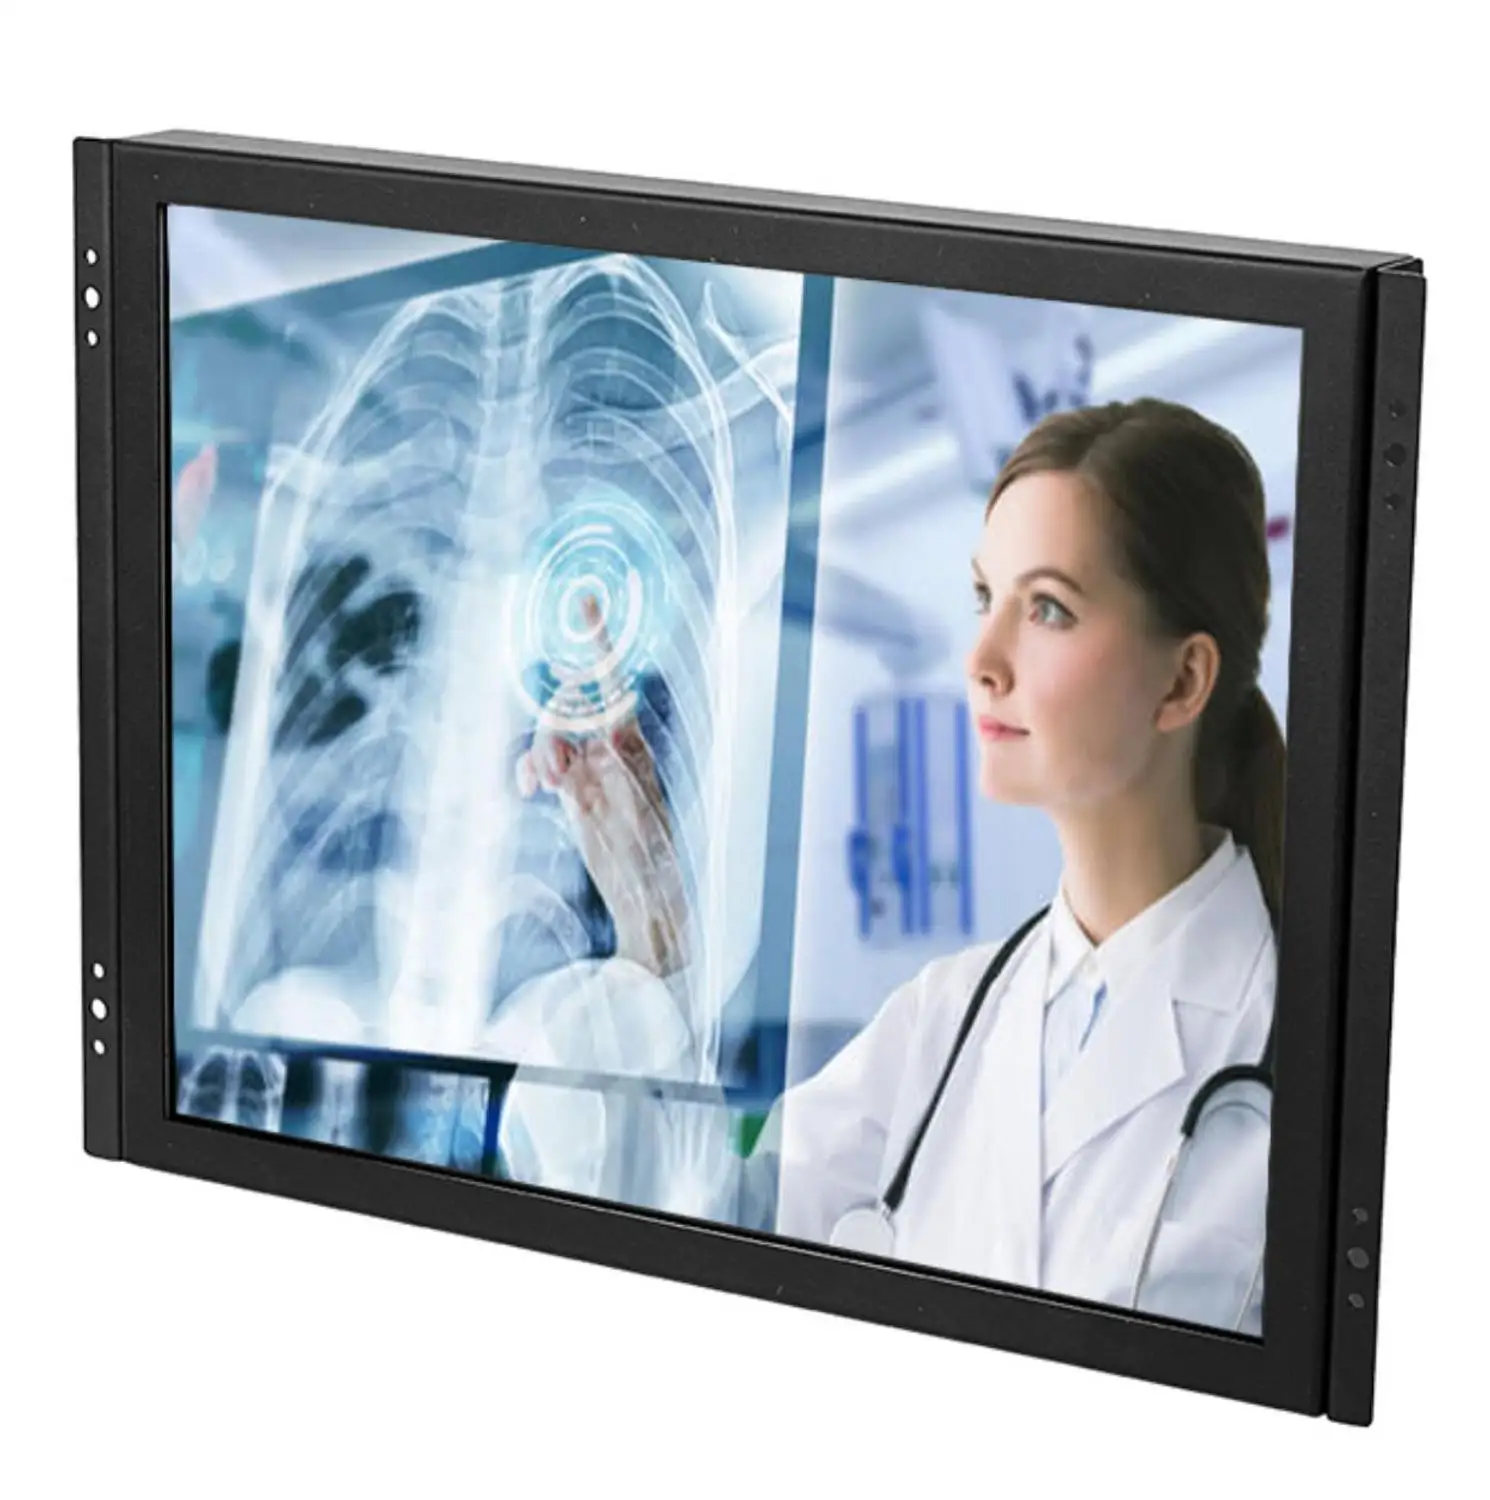 1000 nits sunlight readable 17 inch Industrial touchscreen monitor for kiosk